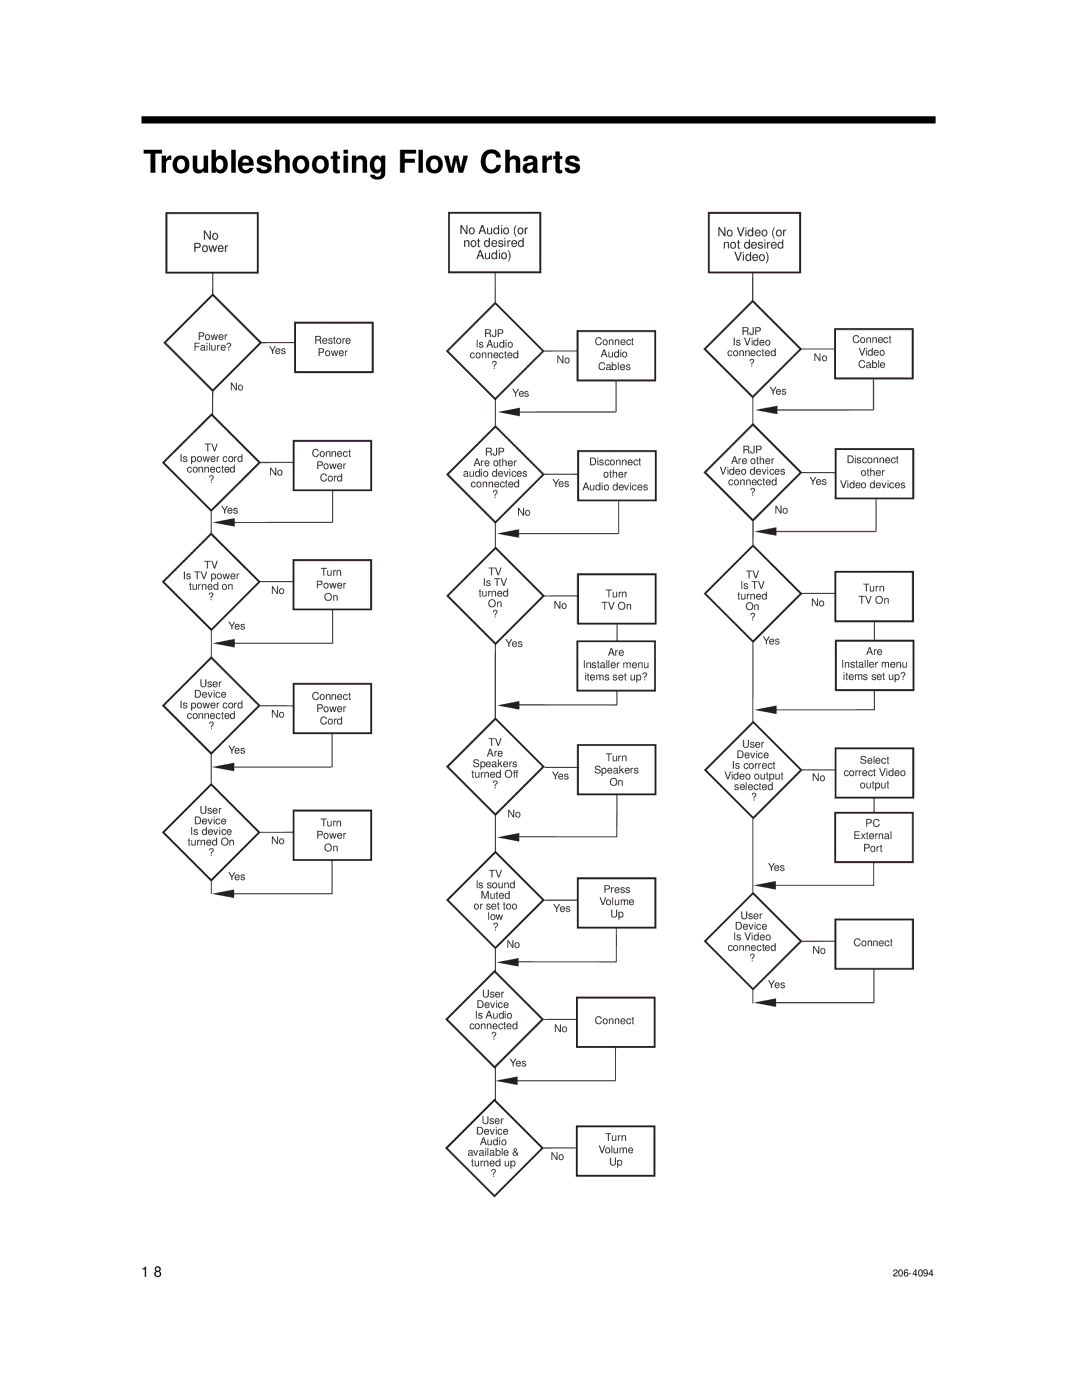 LG Electronics 202B, RJP-201B setup guide Troubleshooting Flow Charts, No Audio or Not desired 